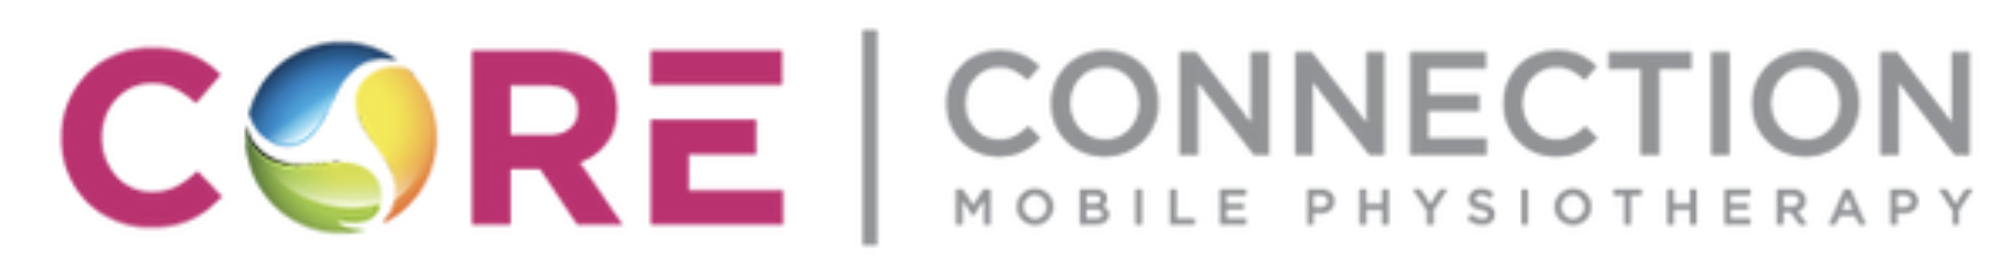 Core Connection Mobile Physiotherapy